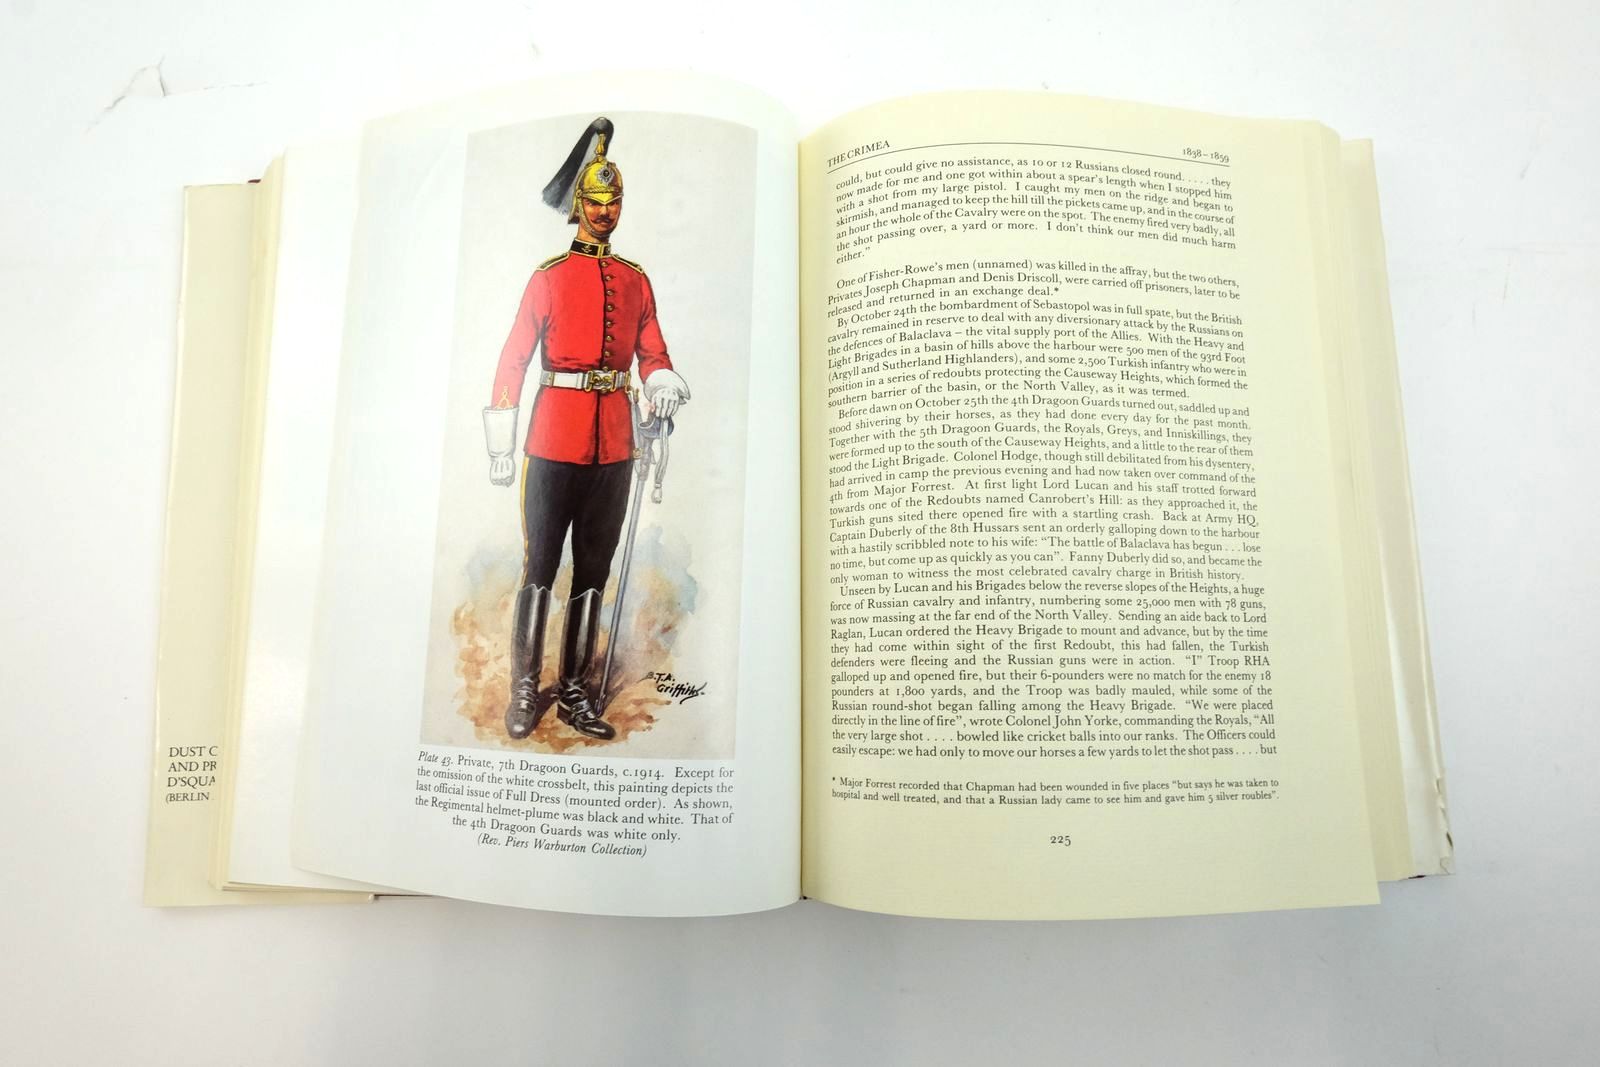 Photo of A HISTORY OF THE 4TH/7TH ROYAL DRAGOON GUARDS AND THEIR PREDECESSORS 1685 - 1980 written by Brereton, J.M. published by Catterick (STOCK CODE: 2137324)  for sale by Stella & Rose's Books